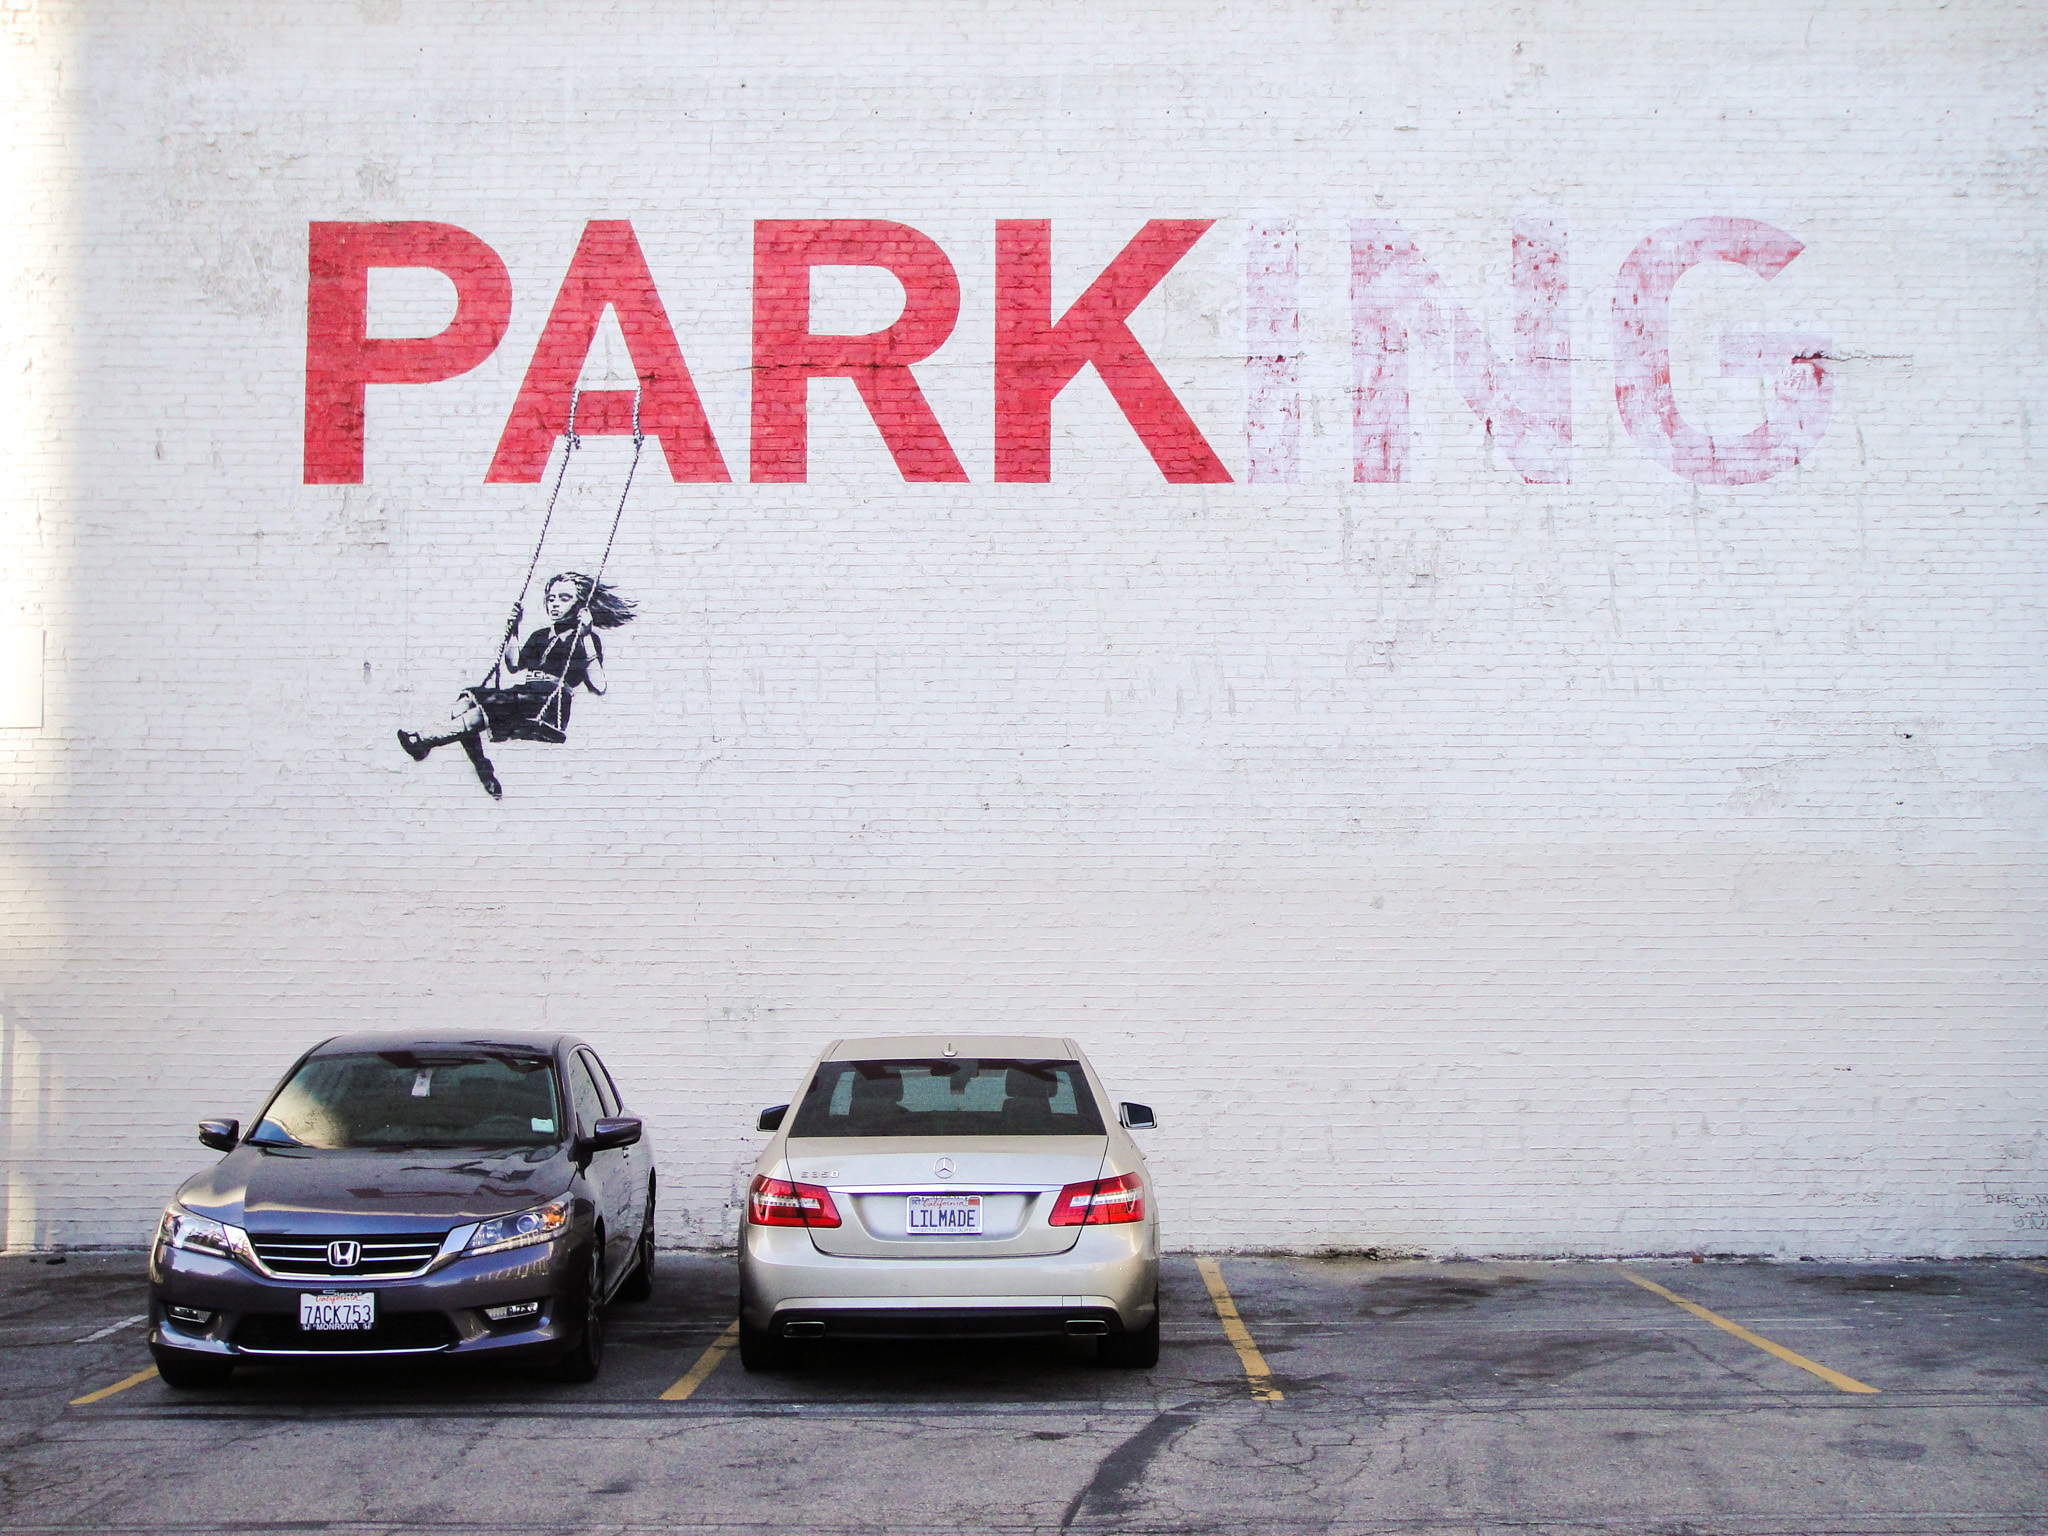 An exhibit devoted to street artist Banksy is on its way to Chicago - Time Out Chicago